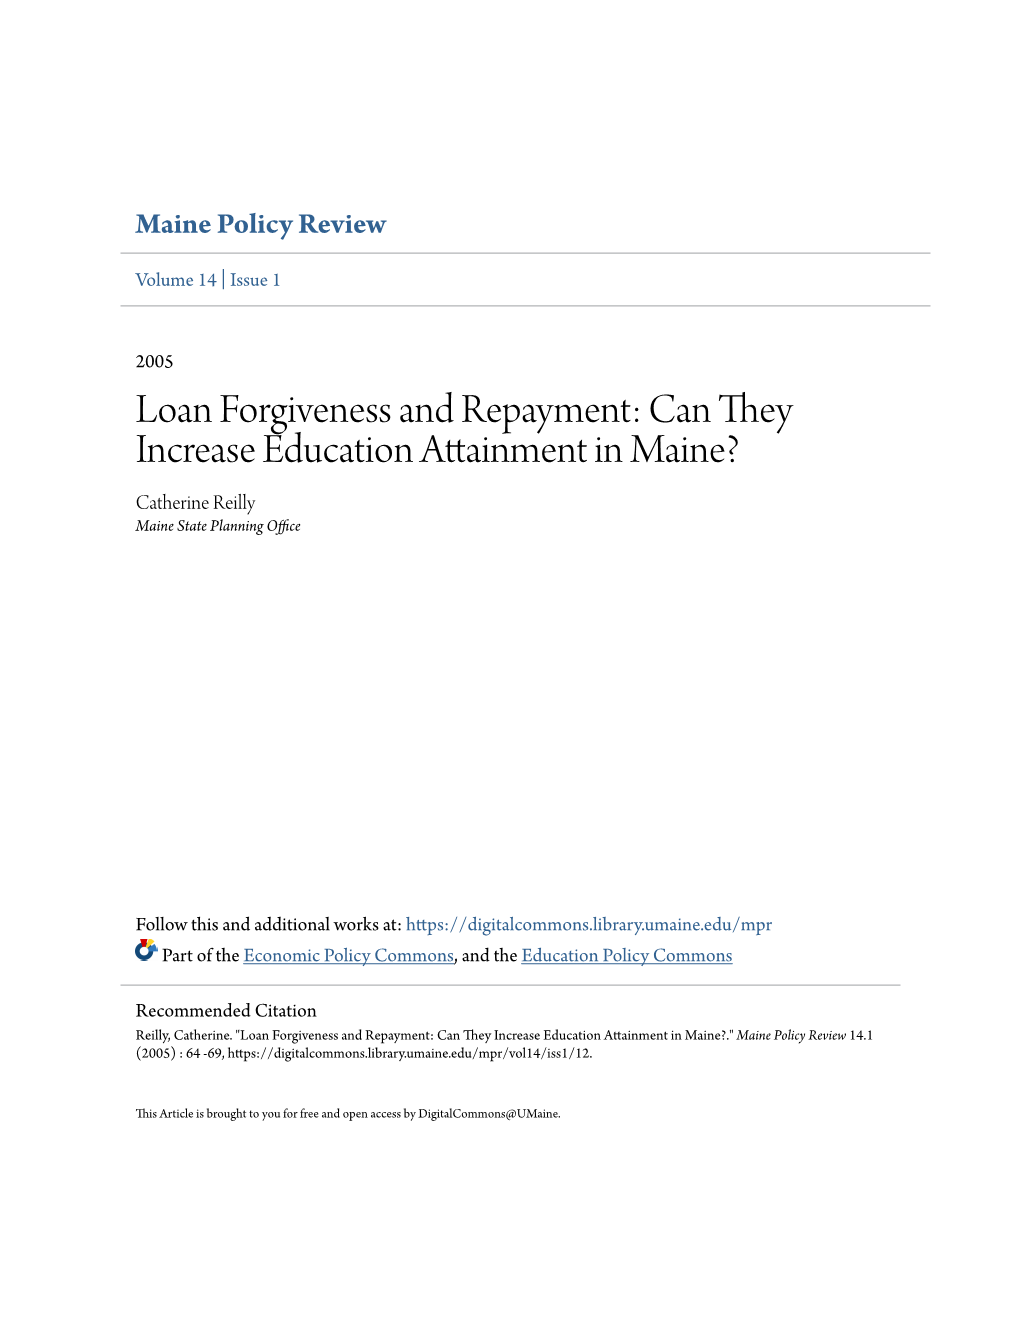 Loan Forgiveness and Repayment: Can They Increase Education Attainment in Maine? Catherine Reilly Maine State Planning Office